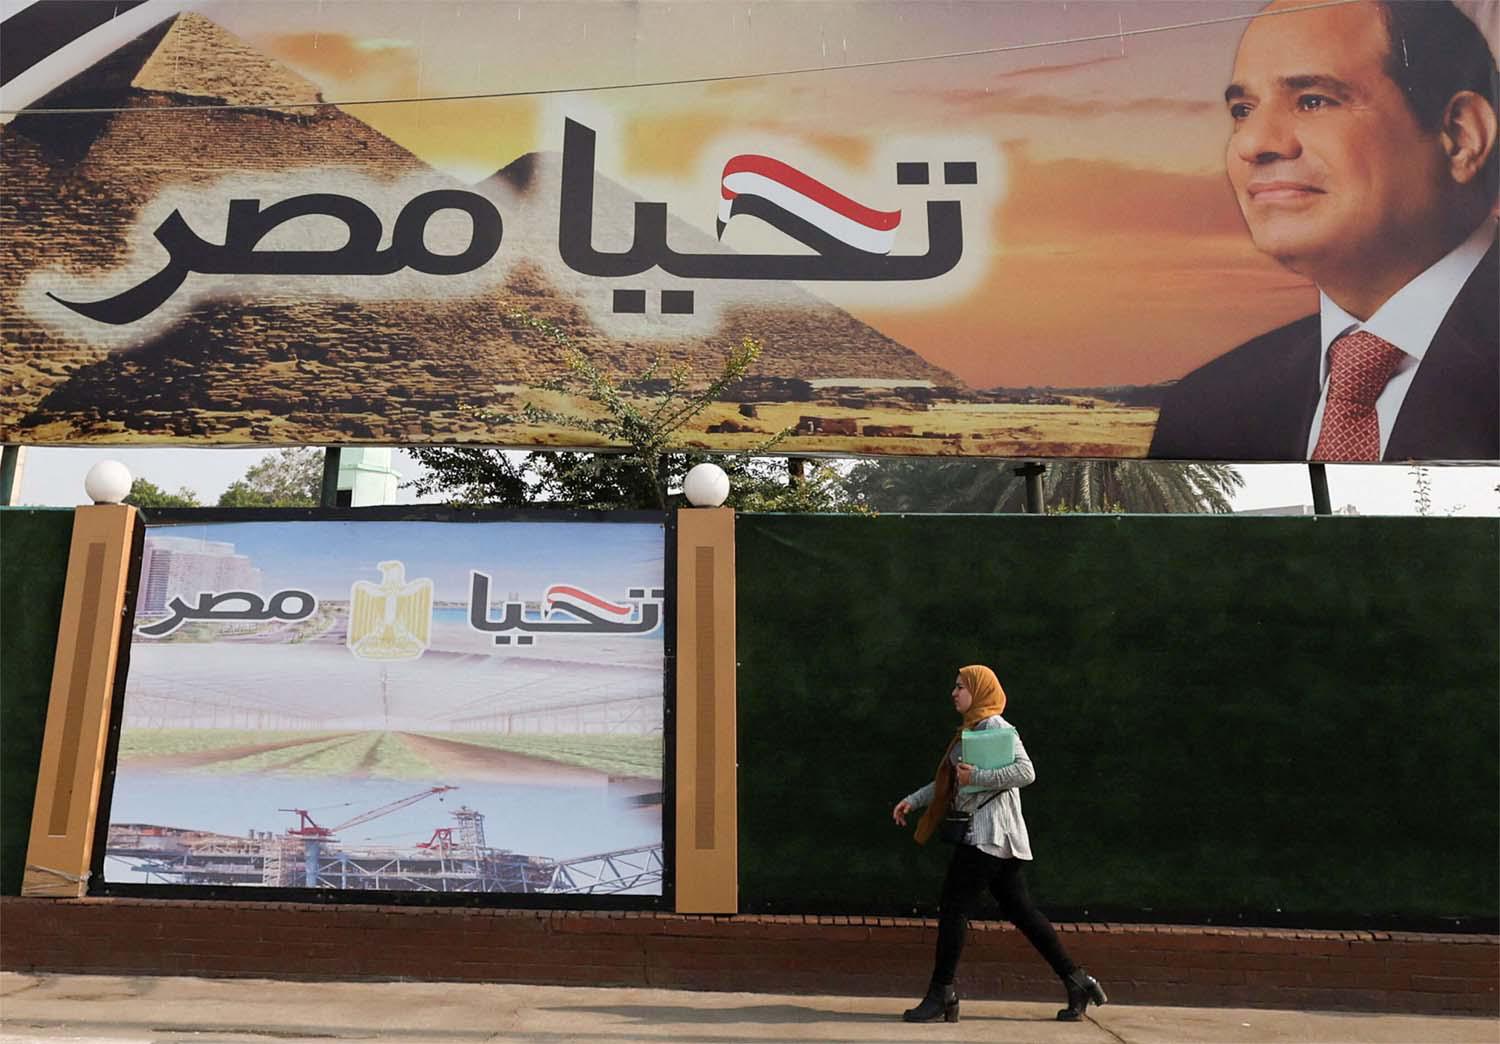 Analysts believe the restrictive economic and repressive political climate were factors behind multinational firms’ withdrawal from Egypt